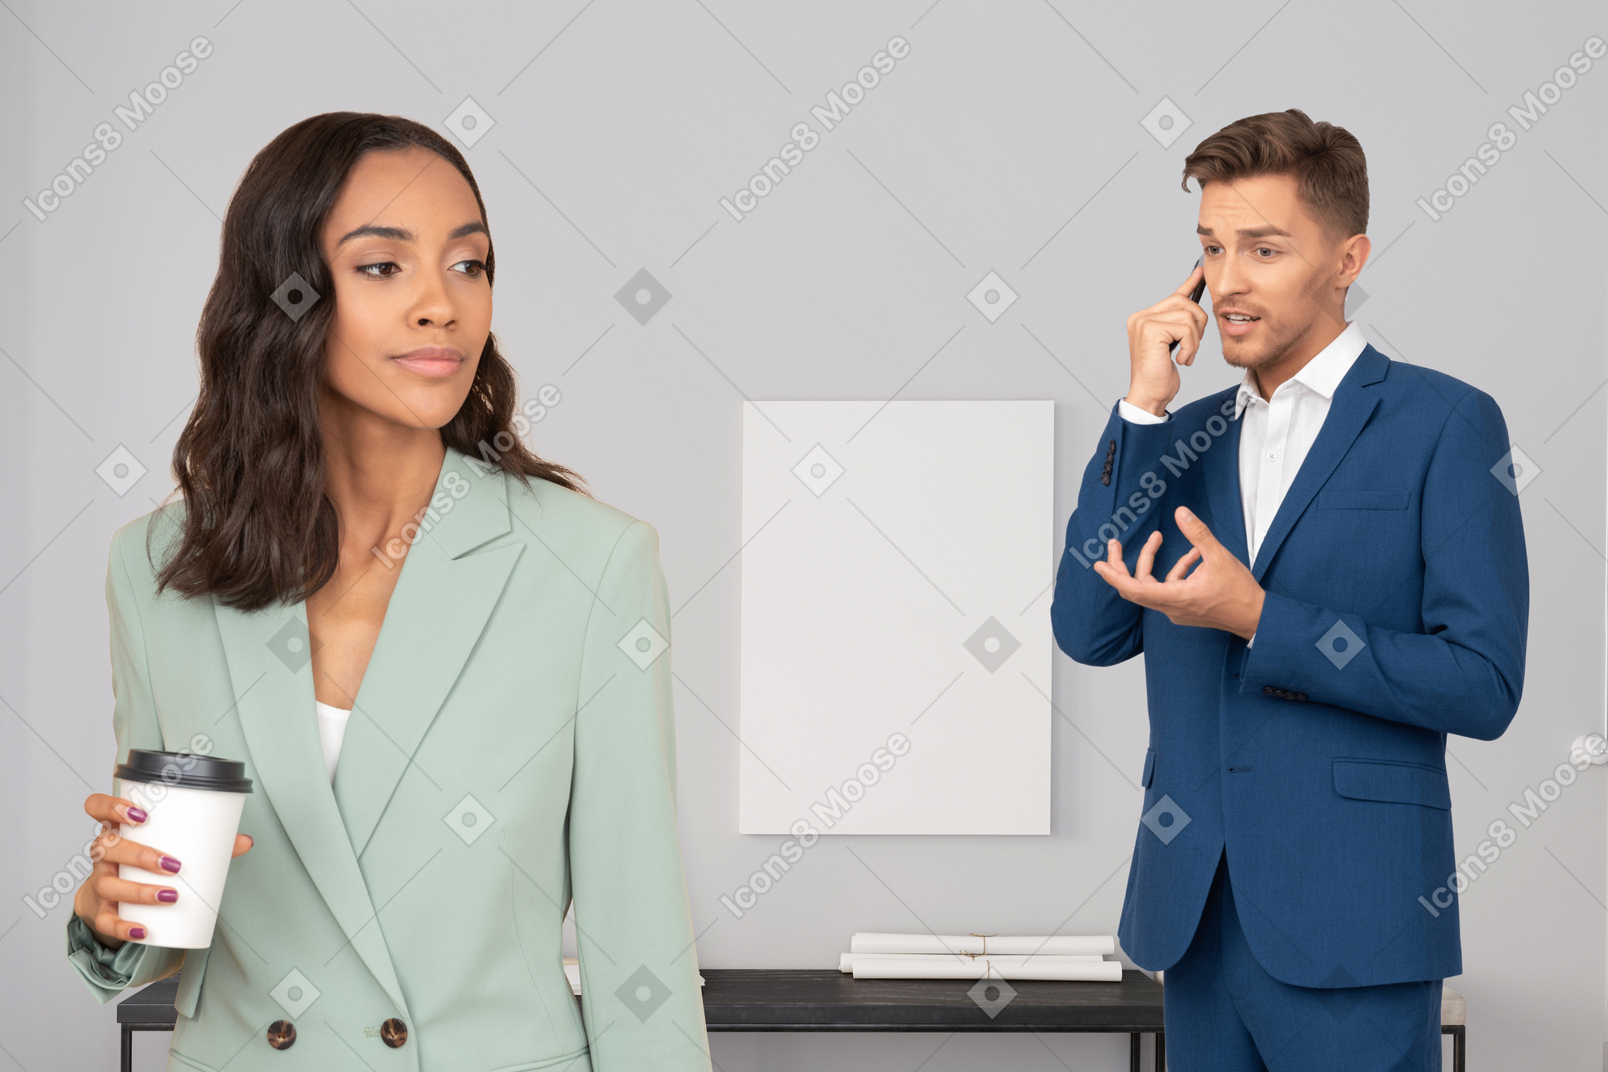 Man in suit talking on the phone while woman next to him holding cup of coffee